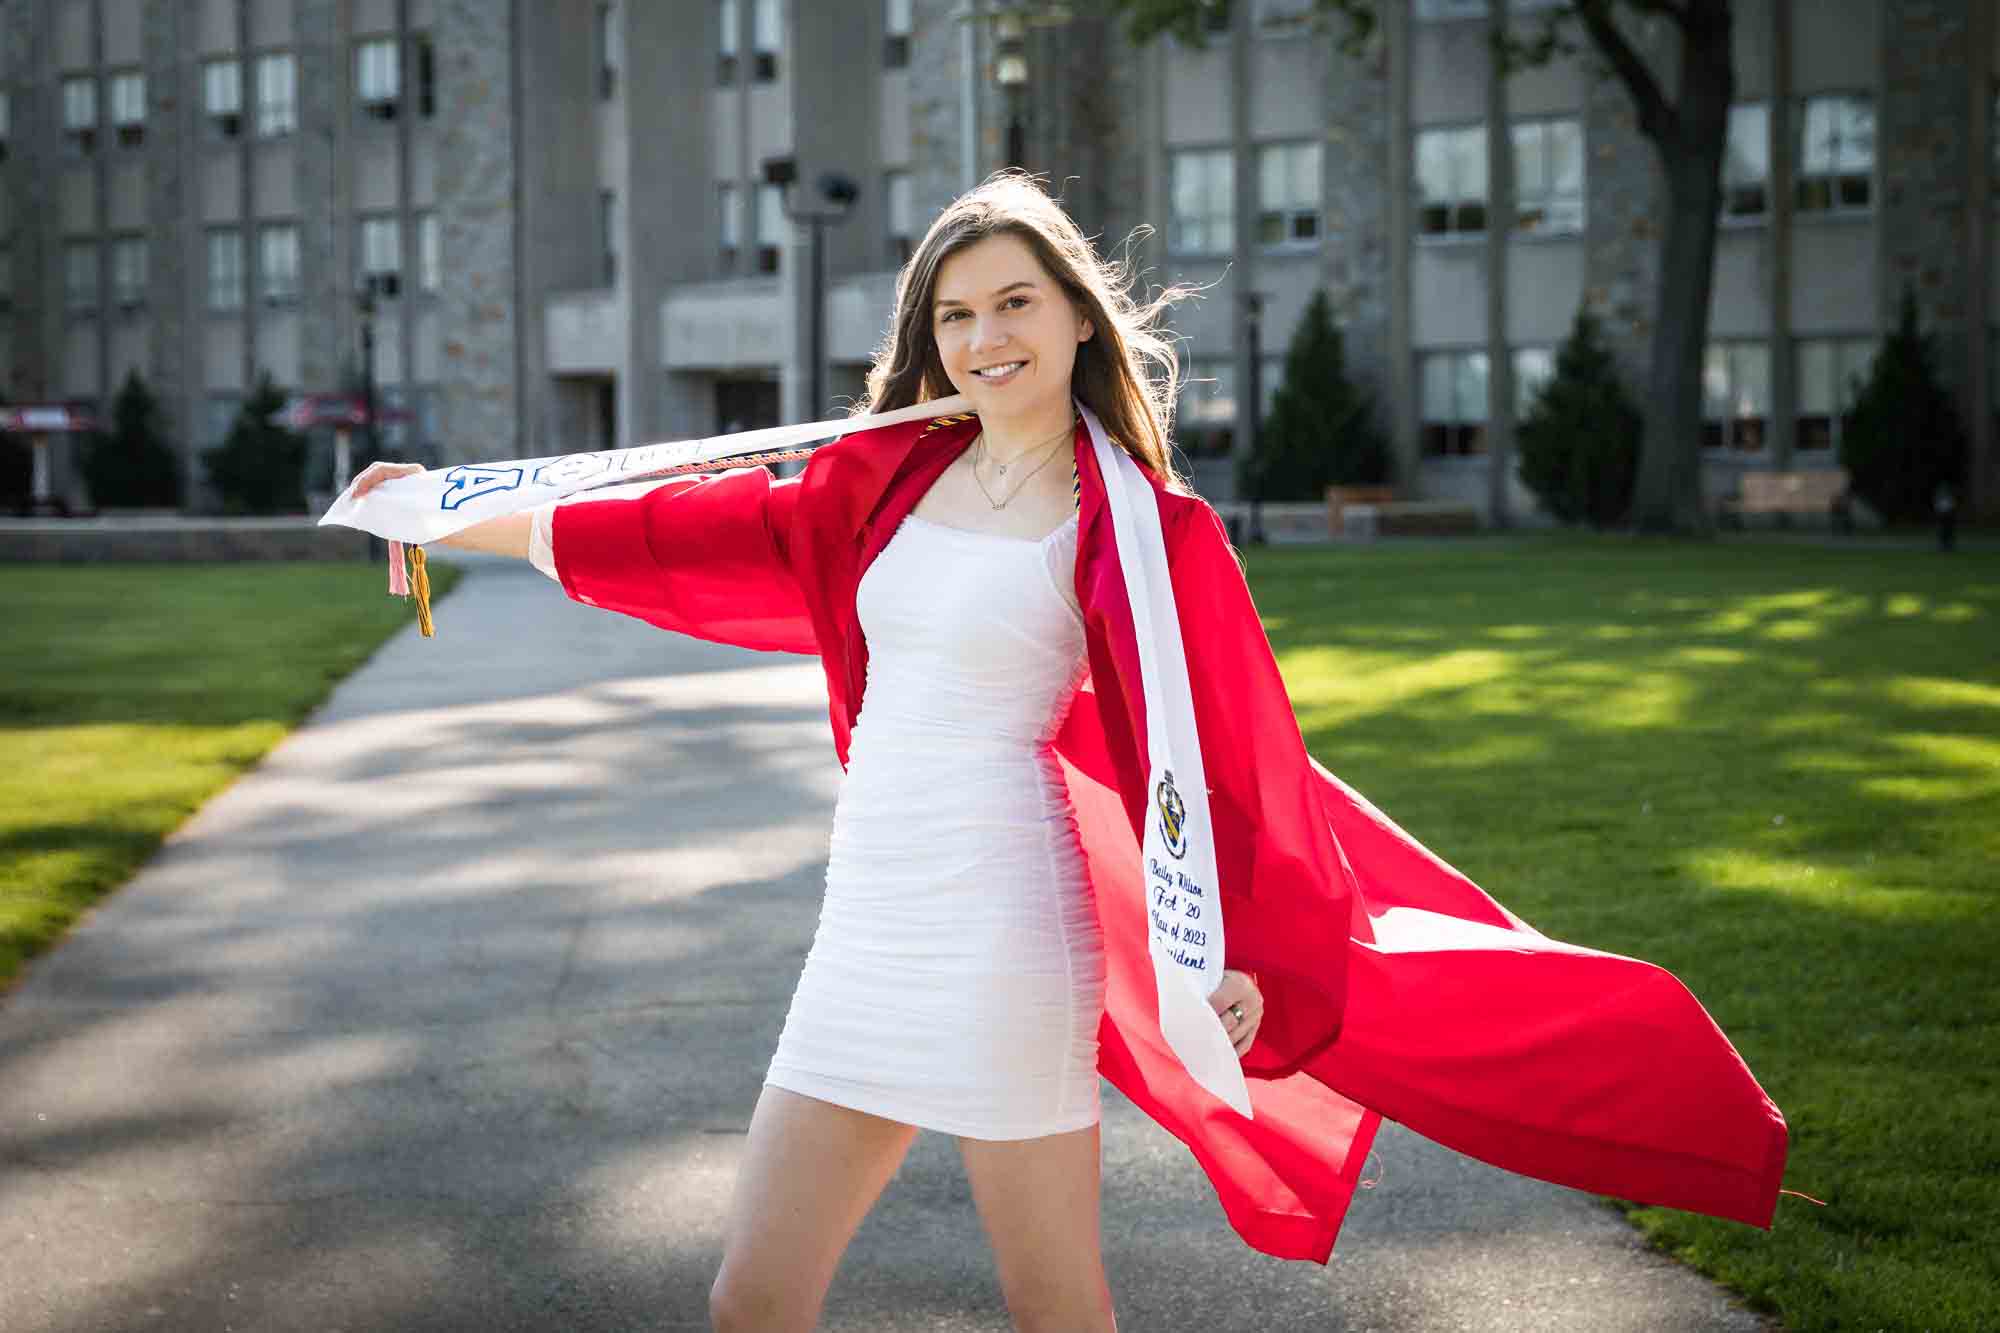 Female graduate on sidewalk wearing red robe and holding out white sashes for an article on graduation portrait photo tips